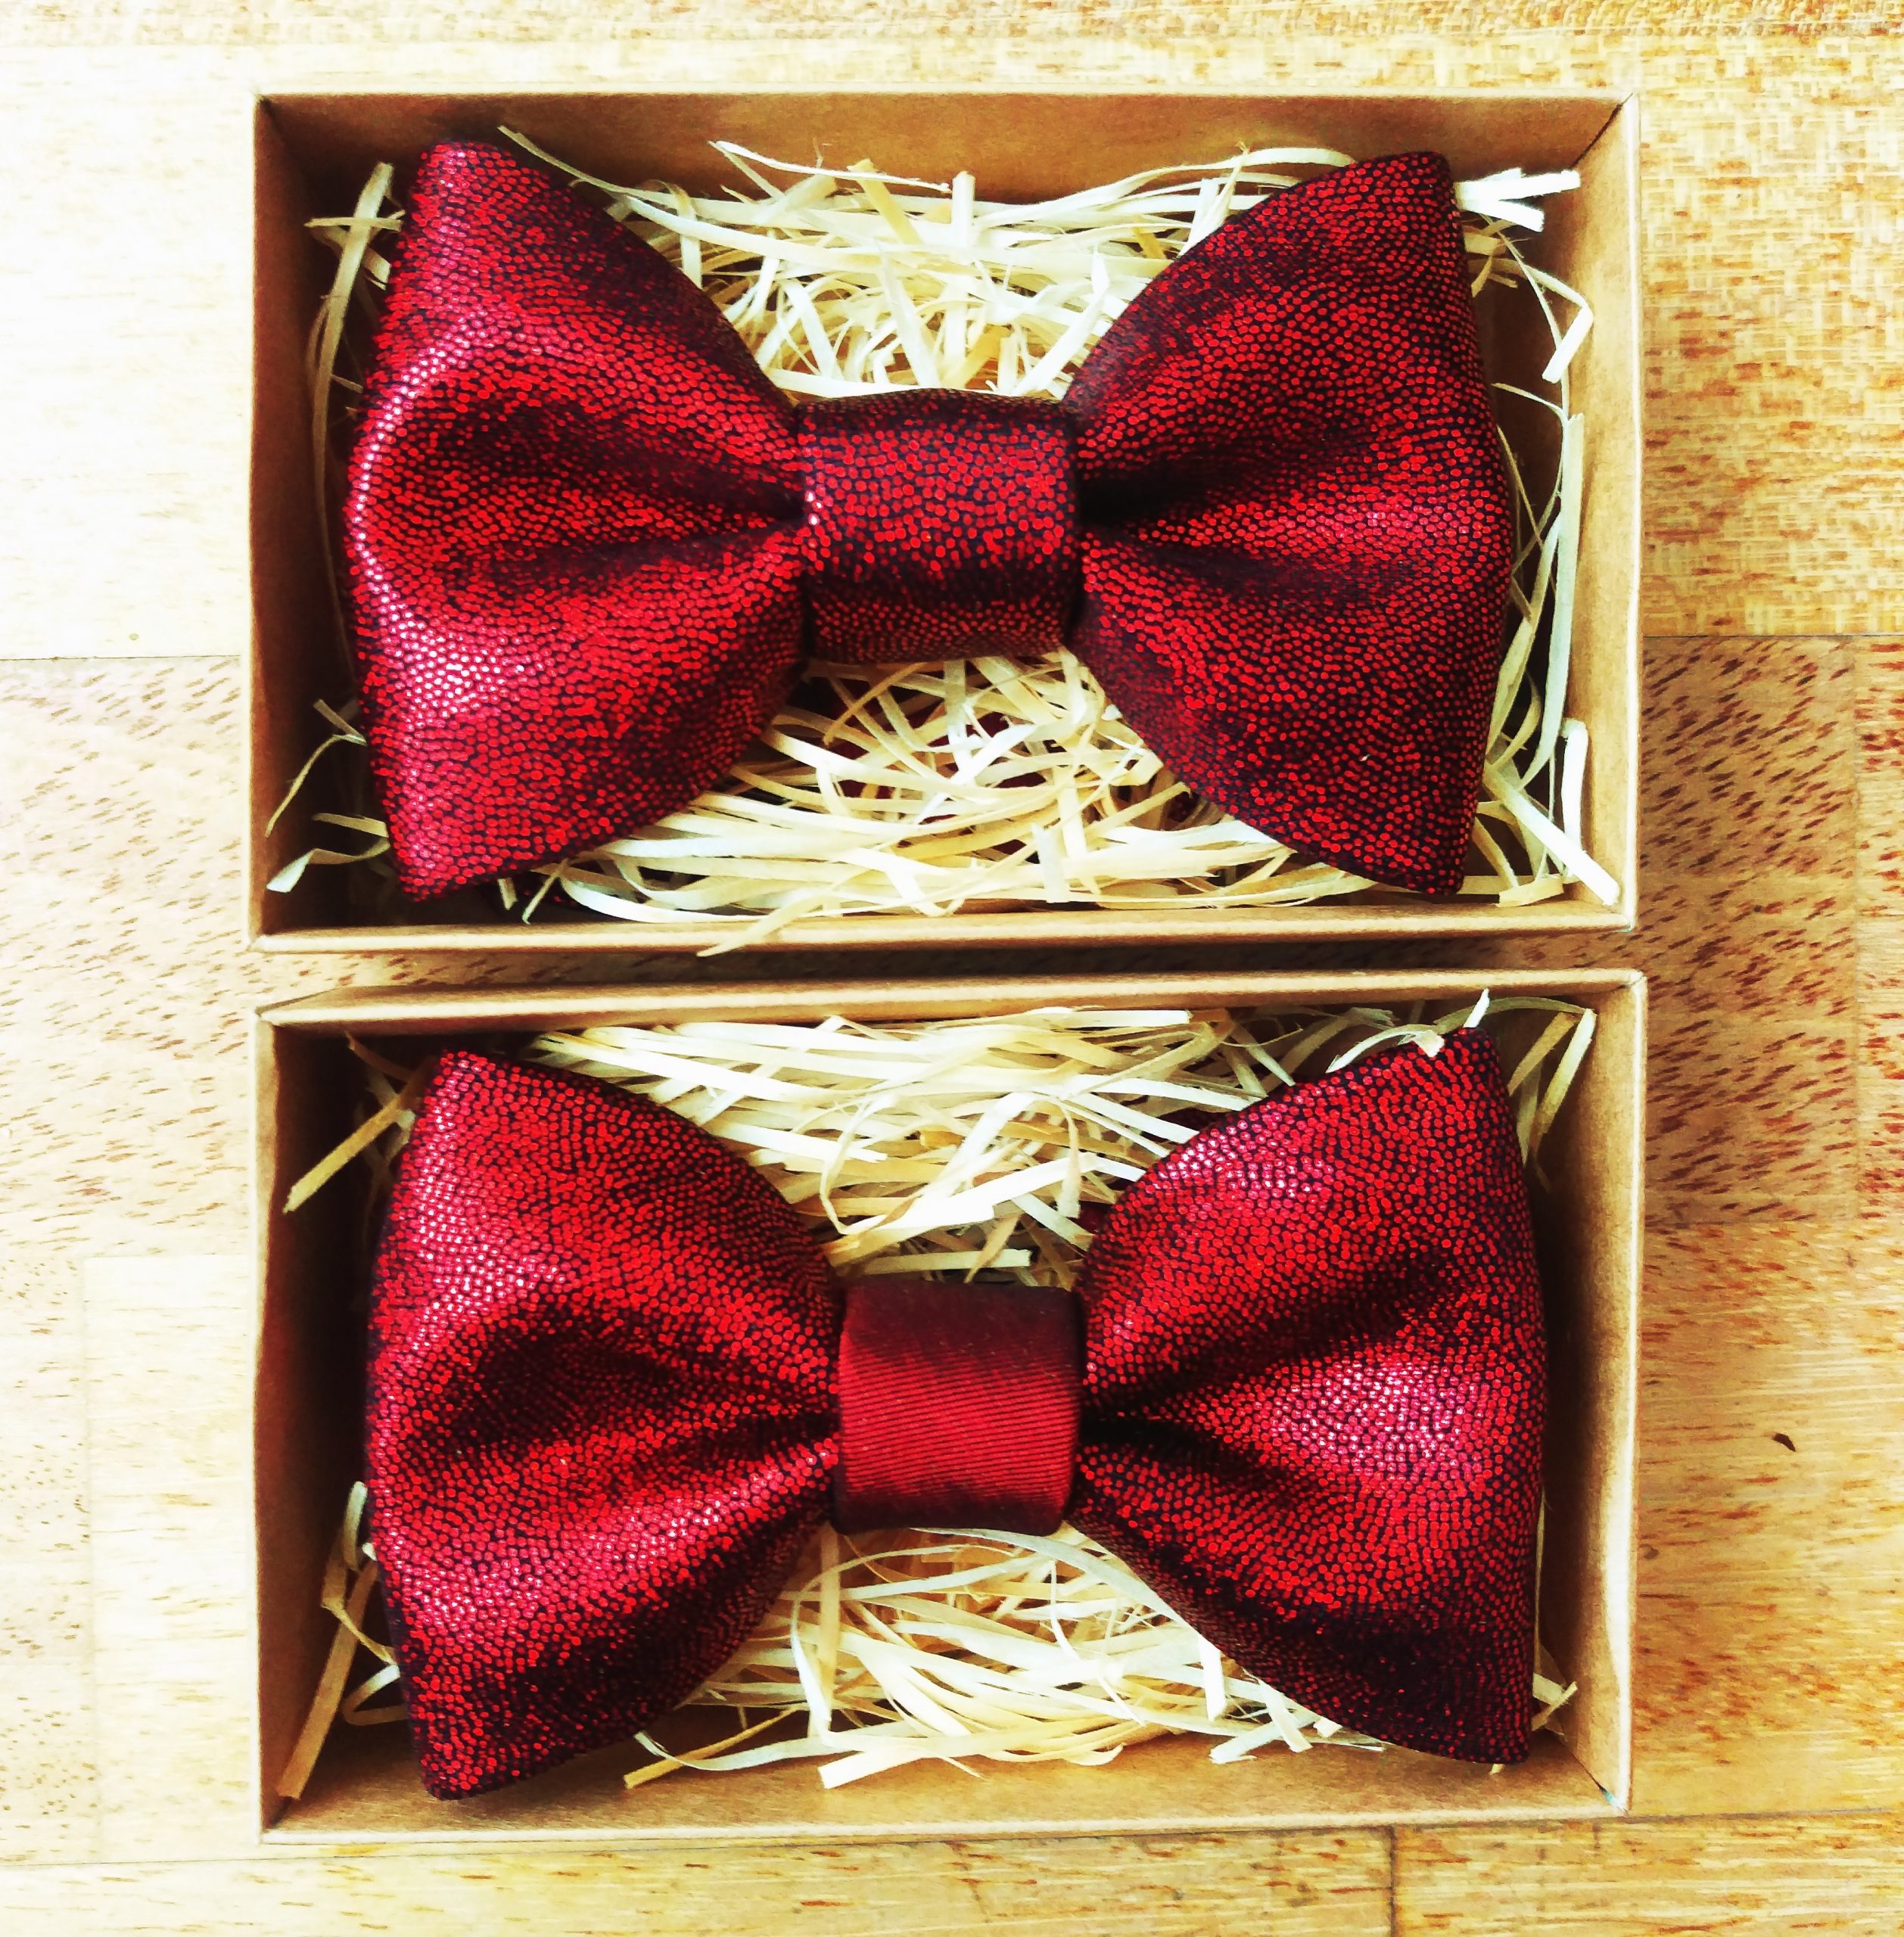 red bow ties